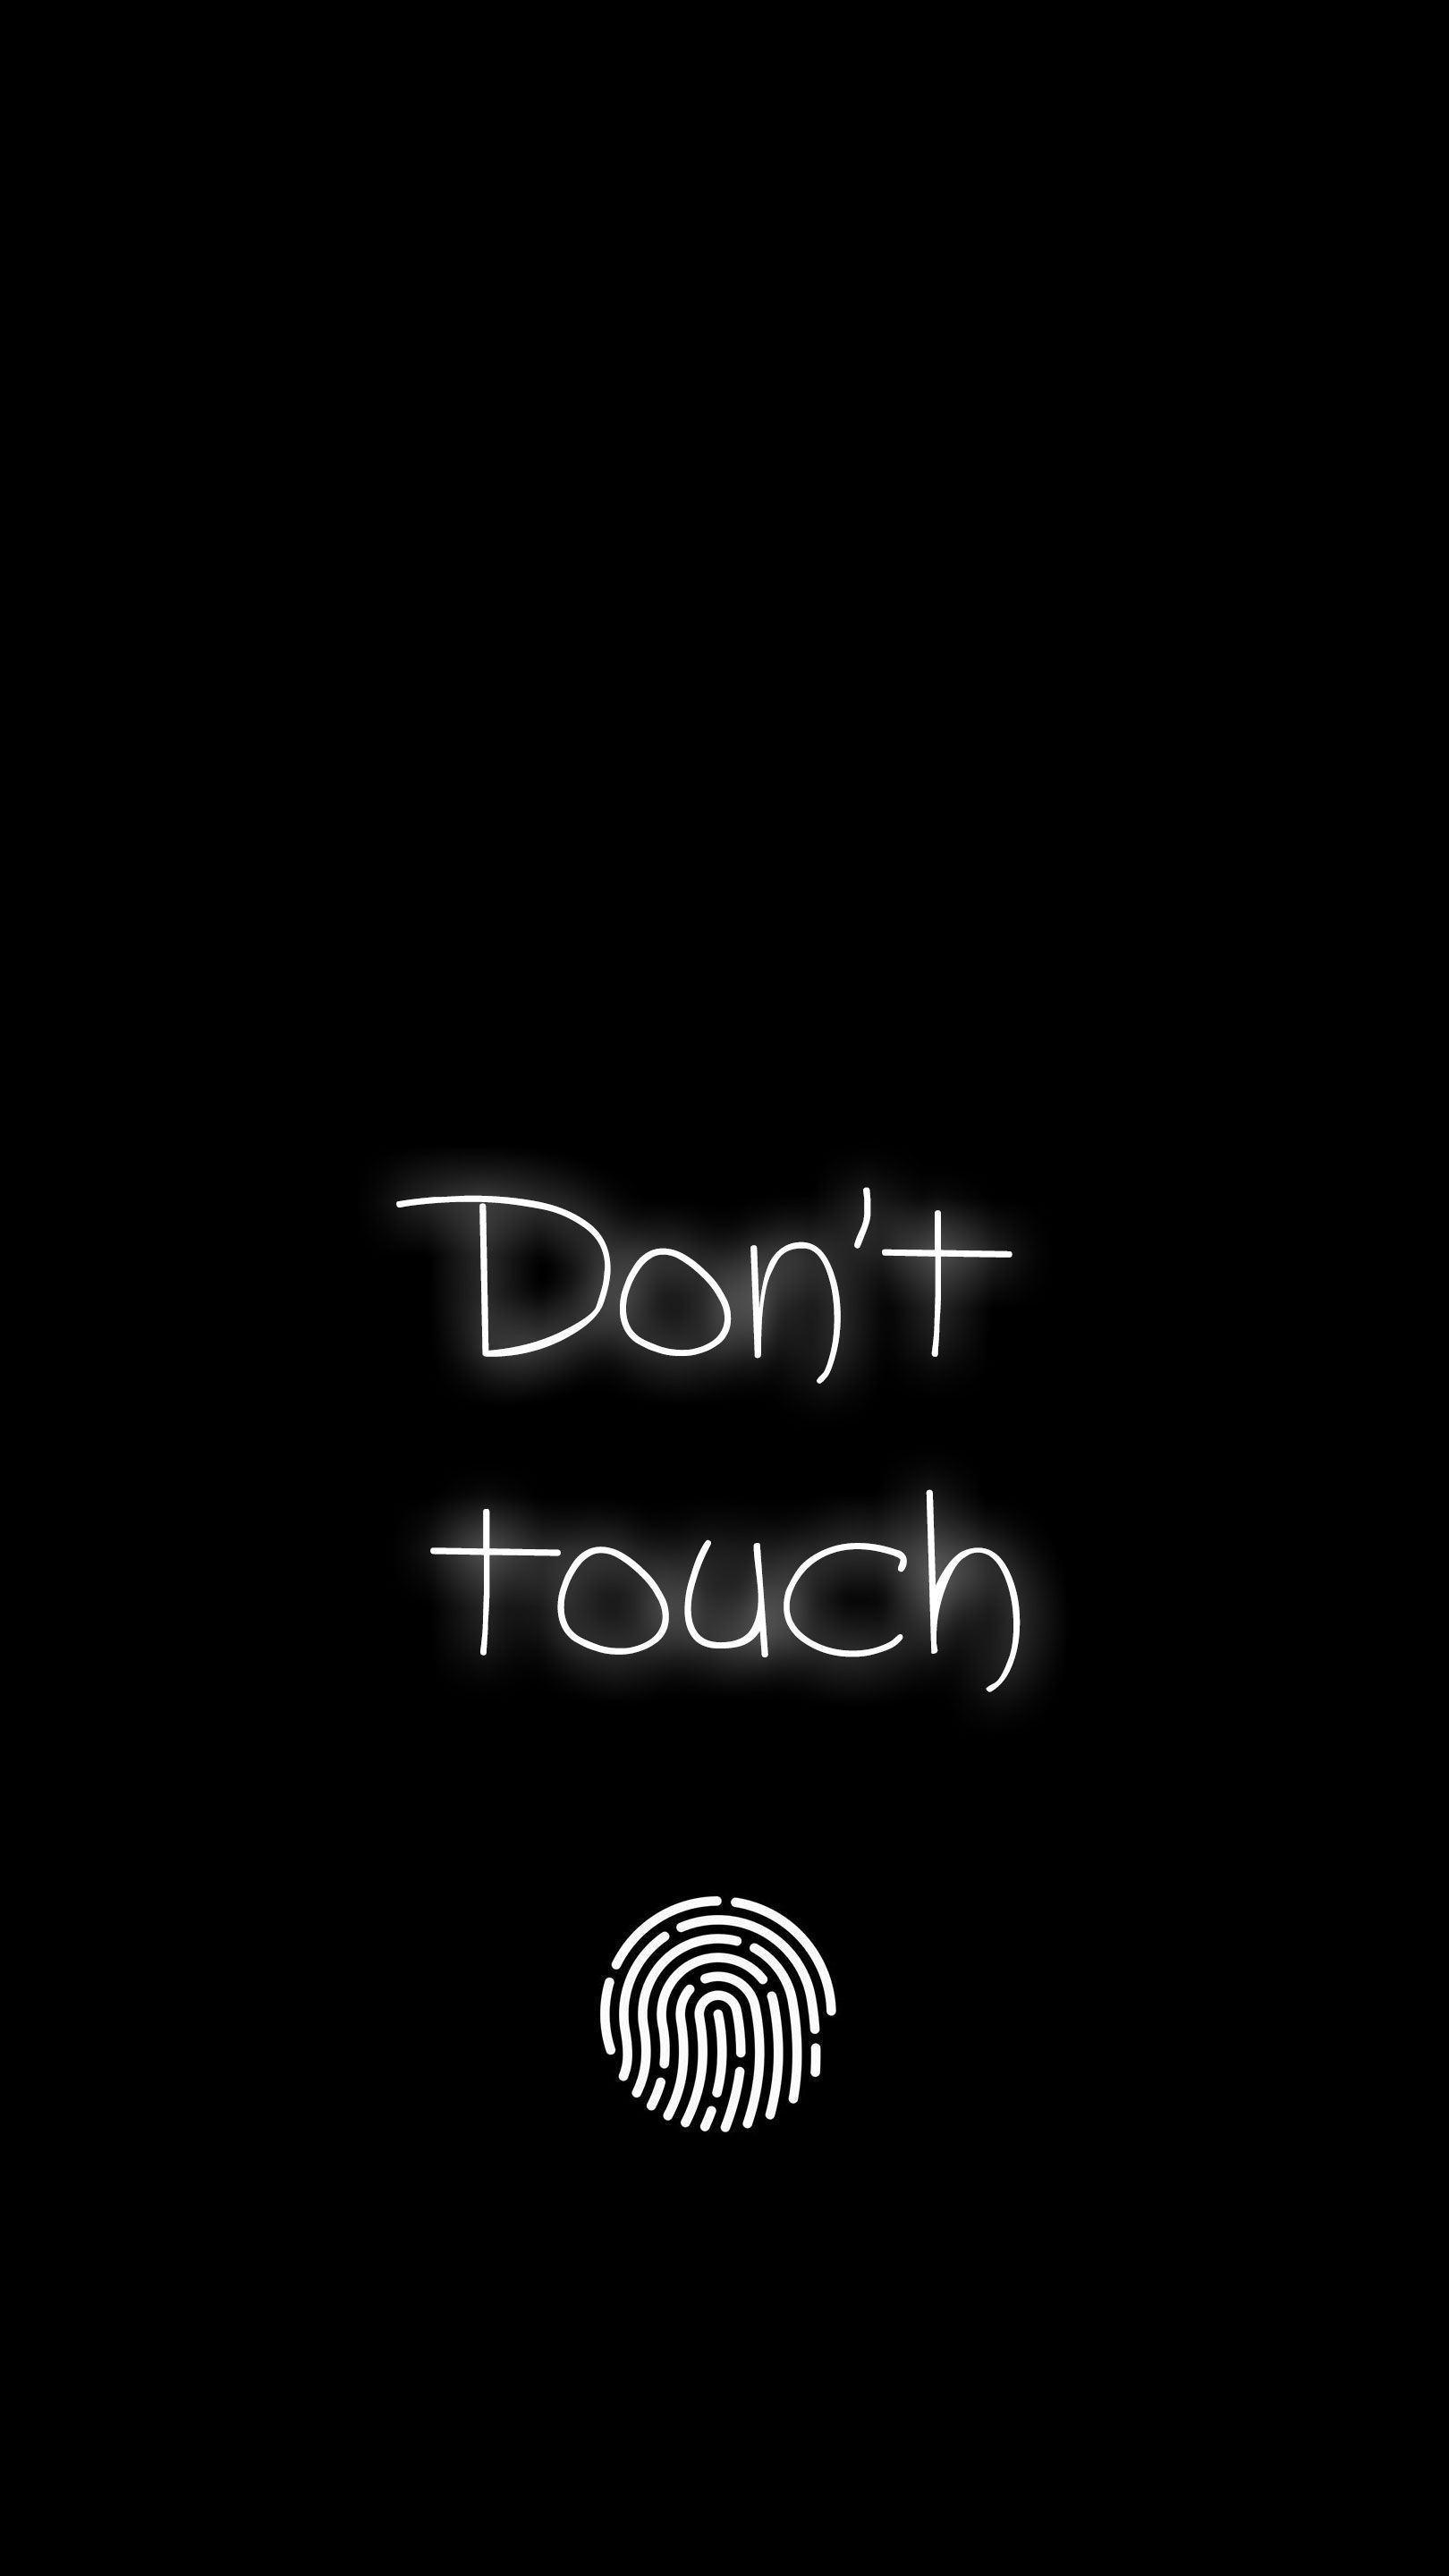 Dont Touch iPhone Wallpaper. Funny phone wallpaper, Lock screen wallpaper iphone, Dont touch my phone wallpaper